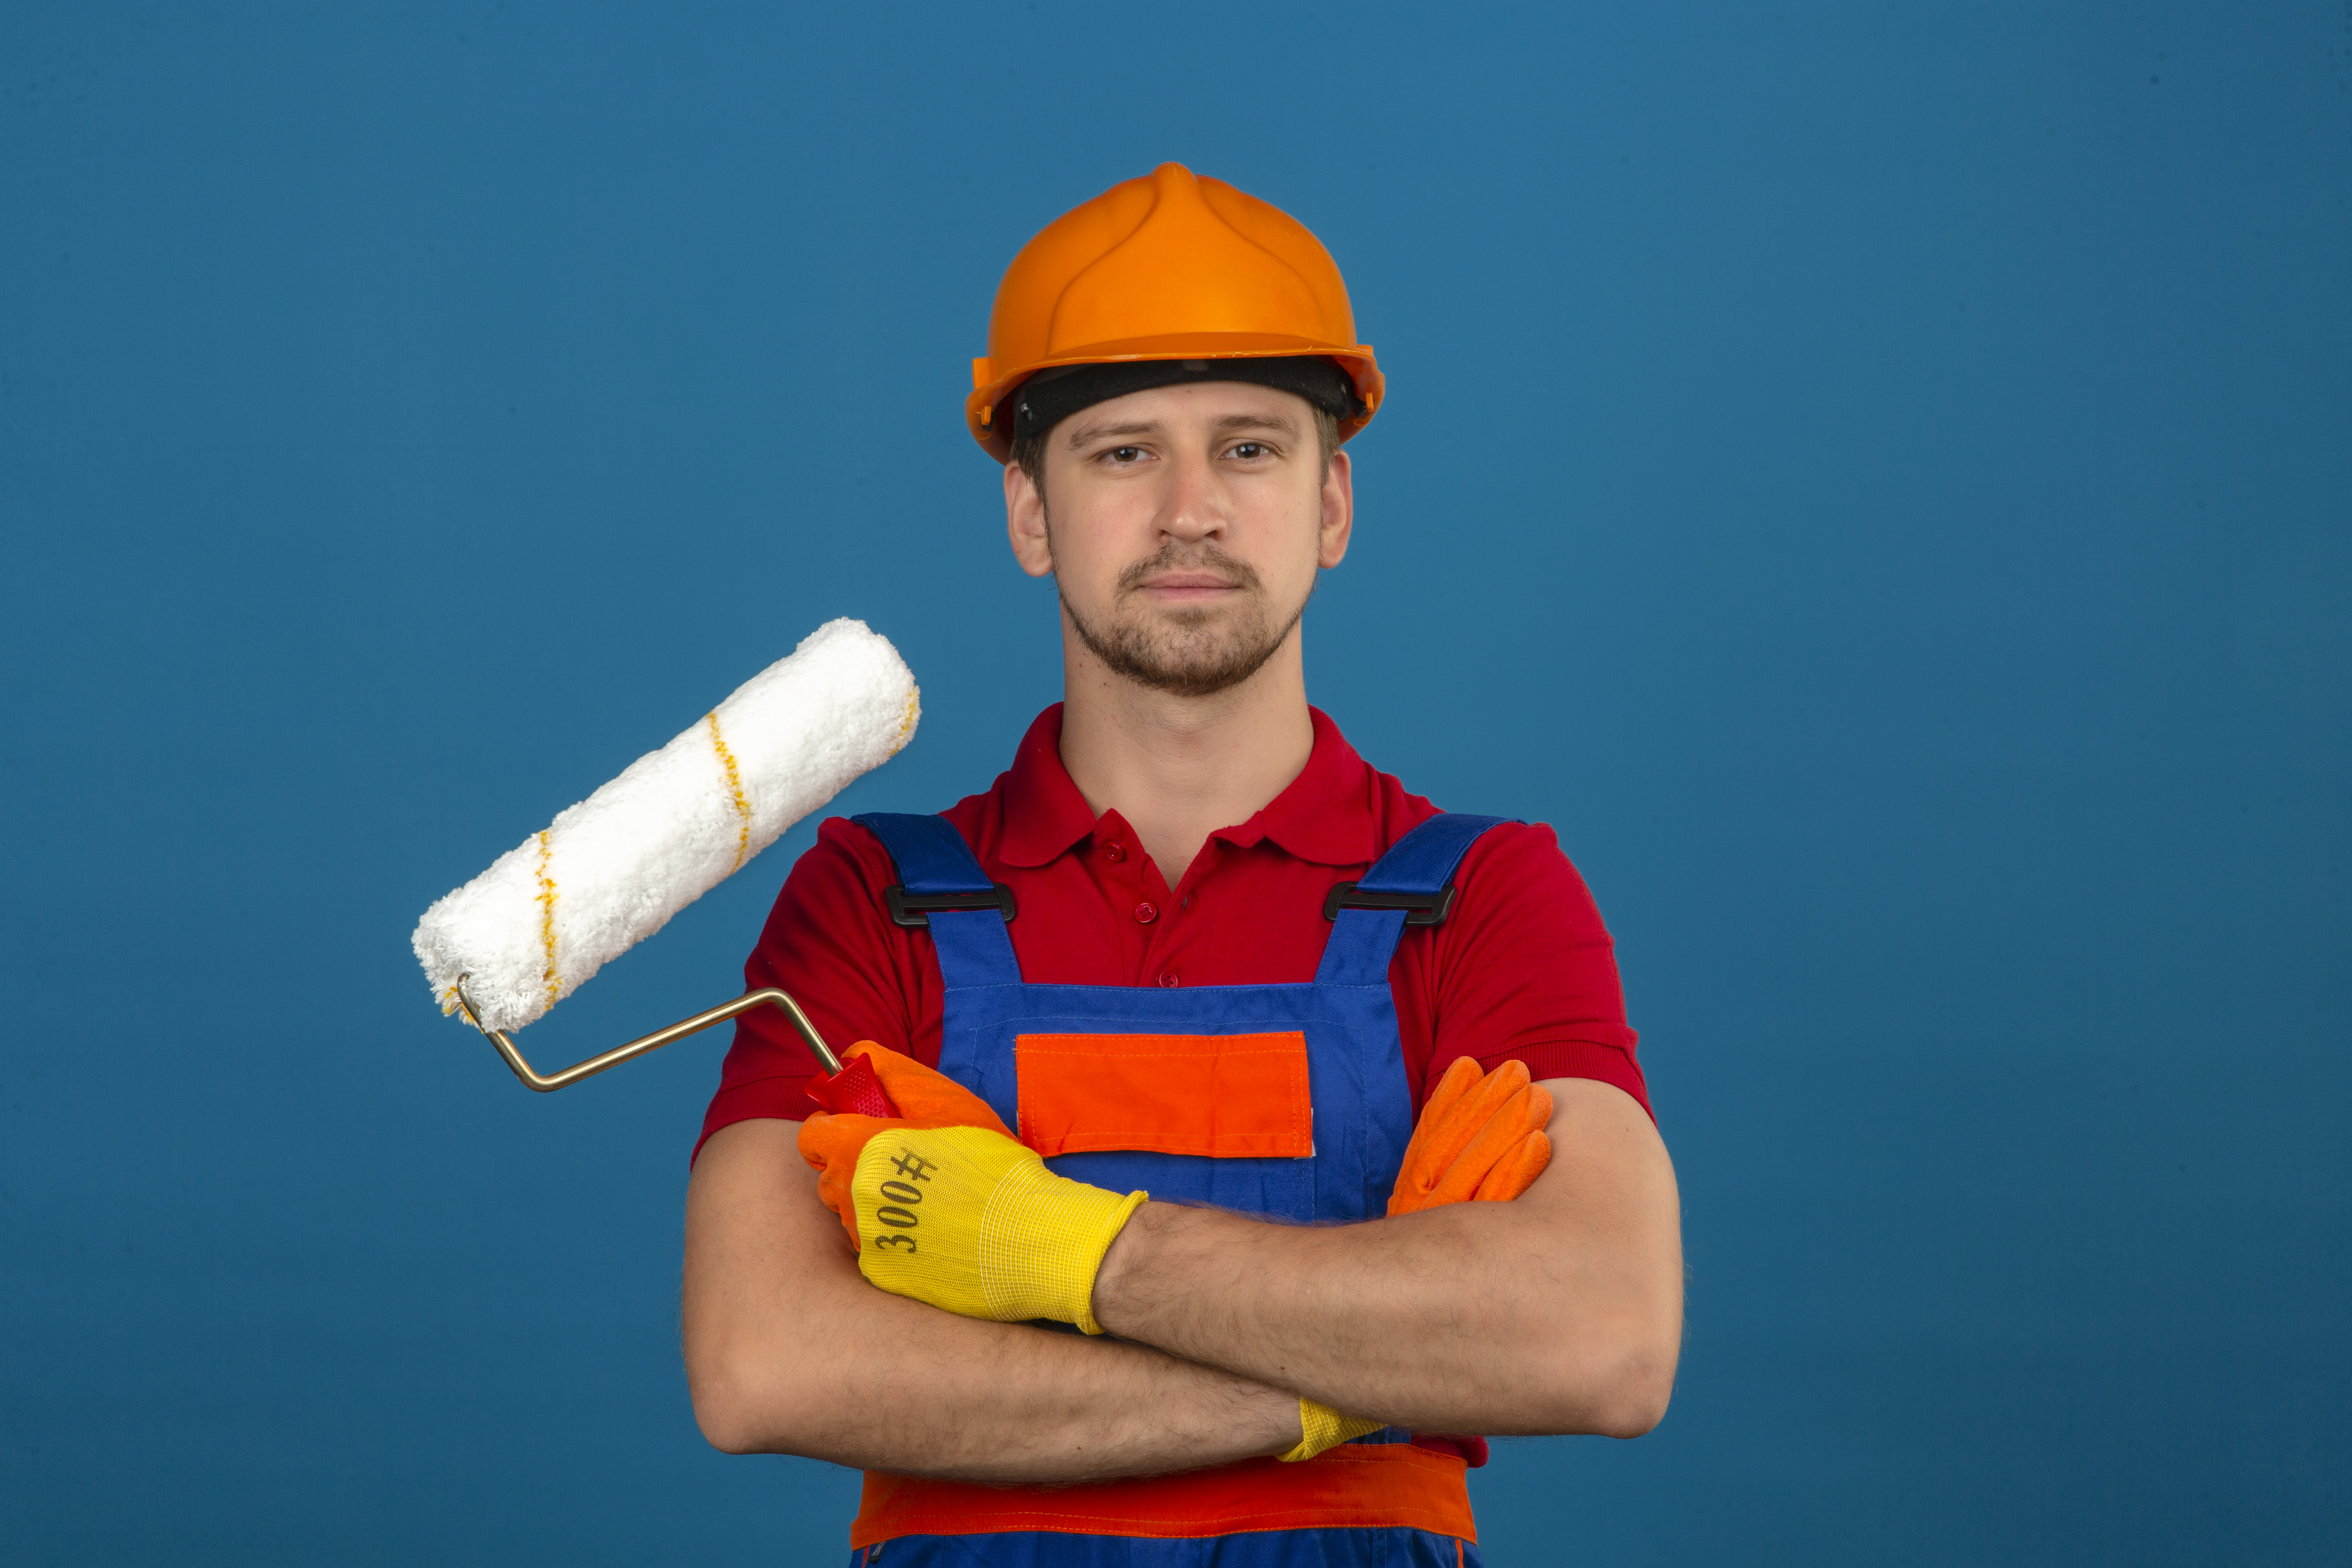 A man in construction uniform with crossed arms while holding a roller | Source: Freepik